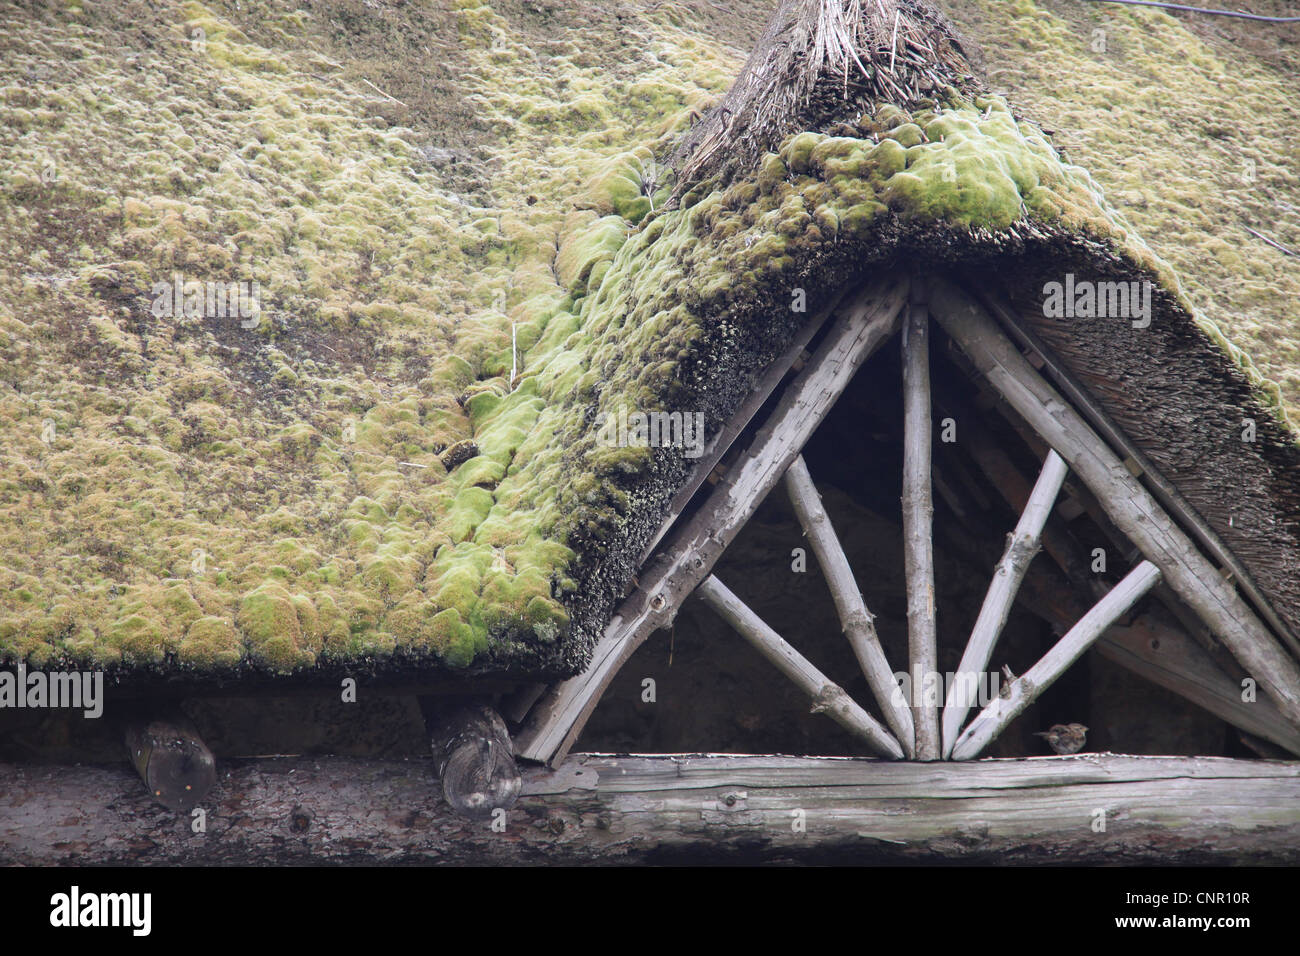 Thatched roof covered in moss, in need of re-newing. Stock Photo